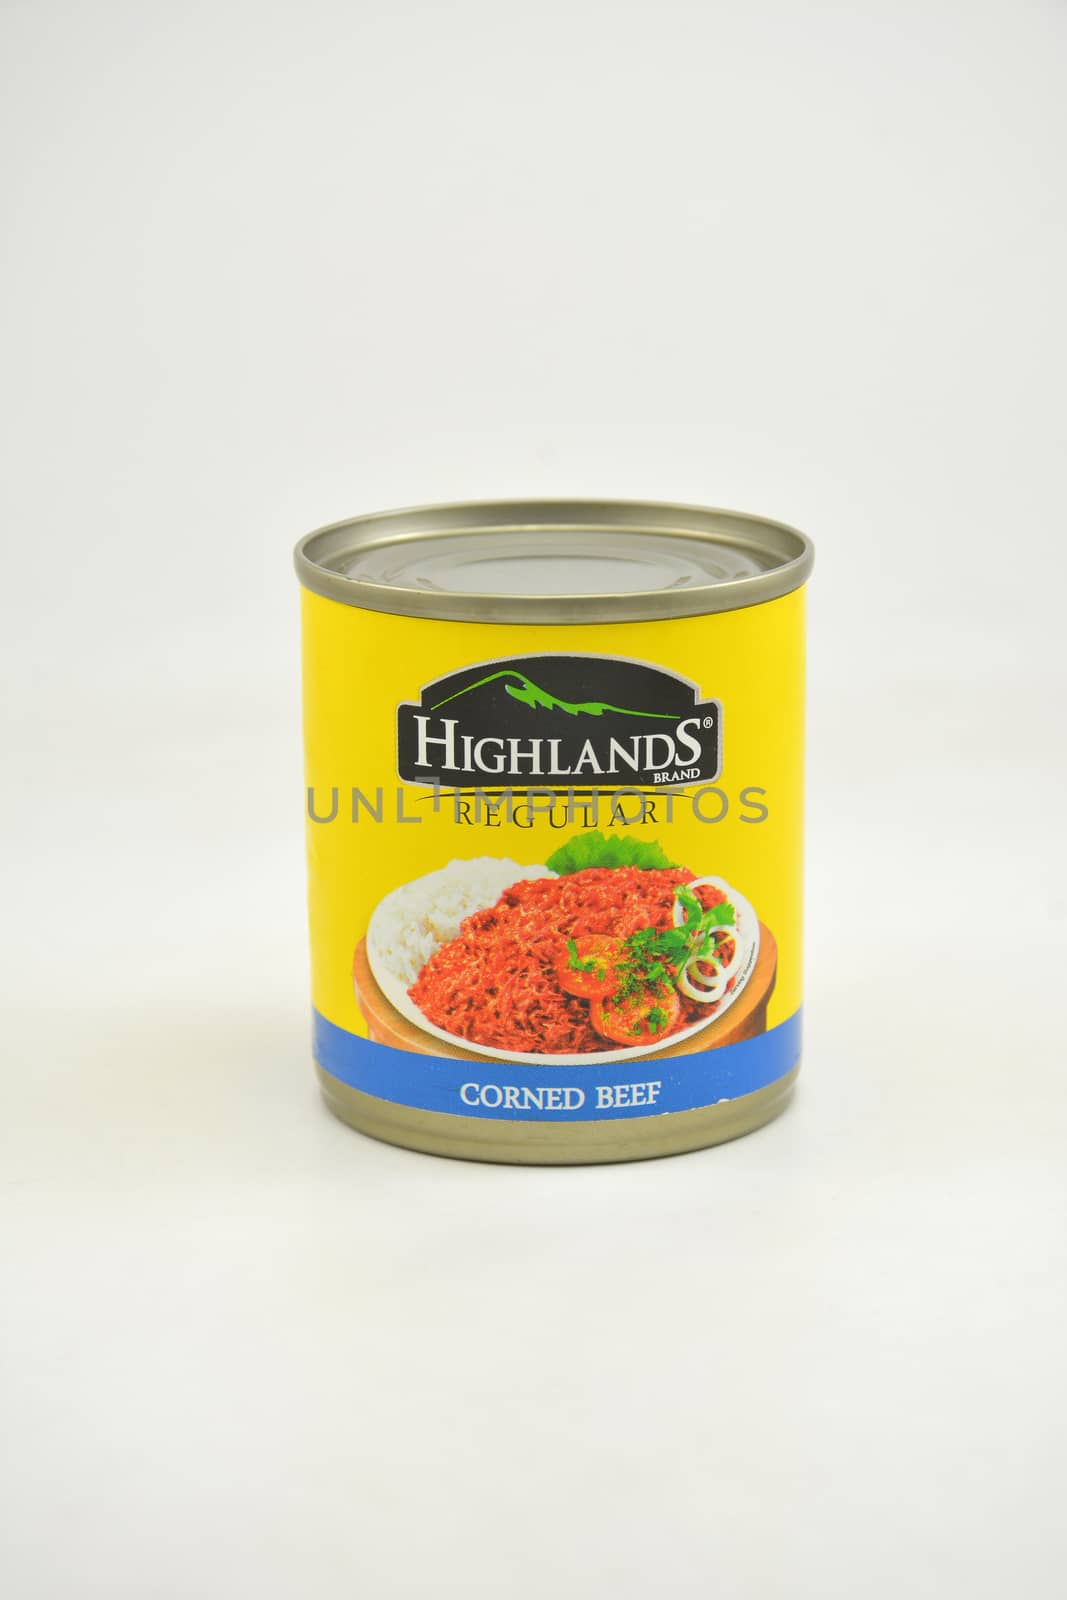 Highlands corned beef can in Manila, Philippines by imwaltersy